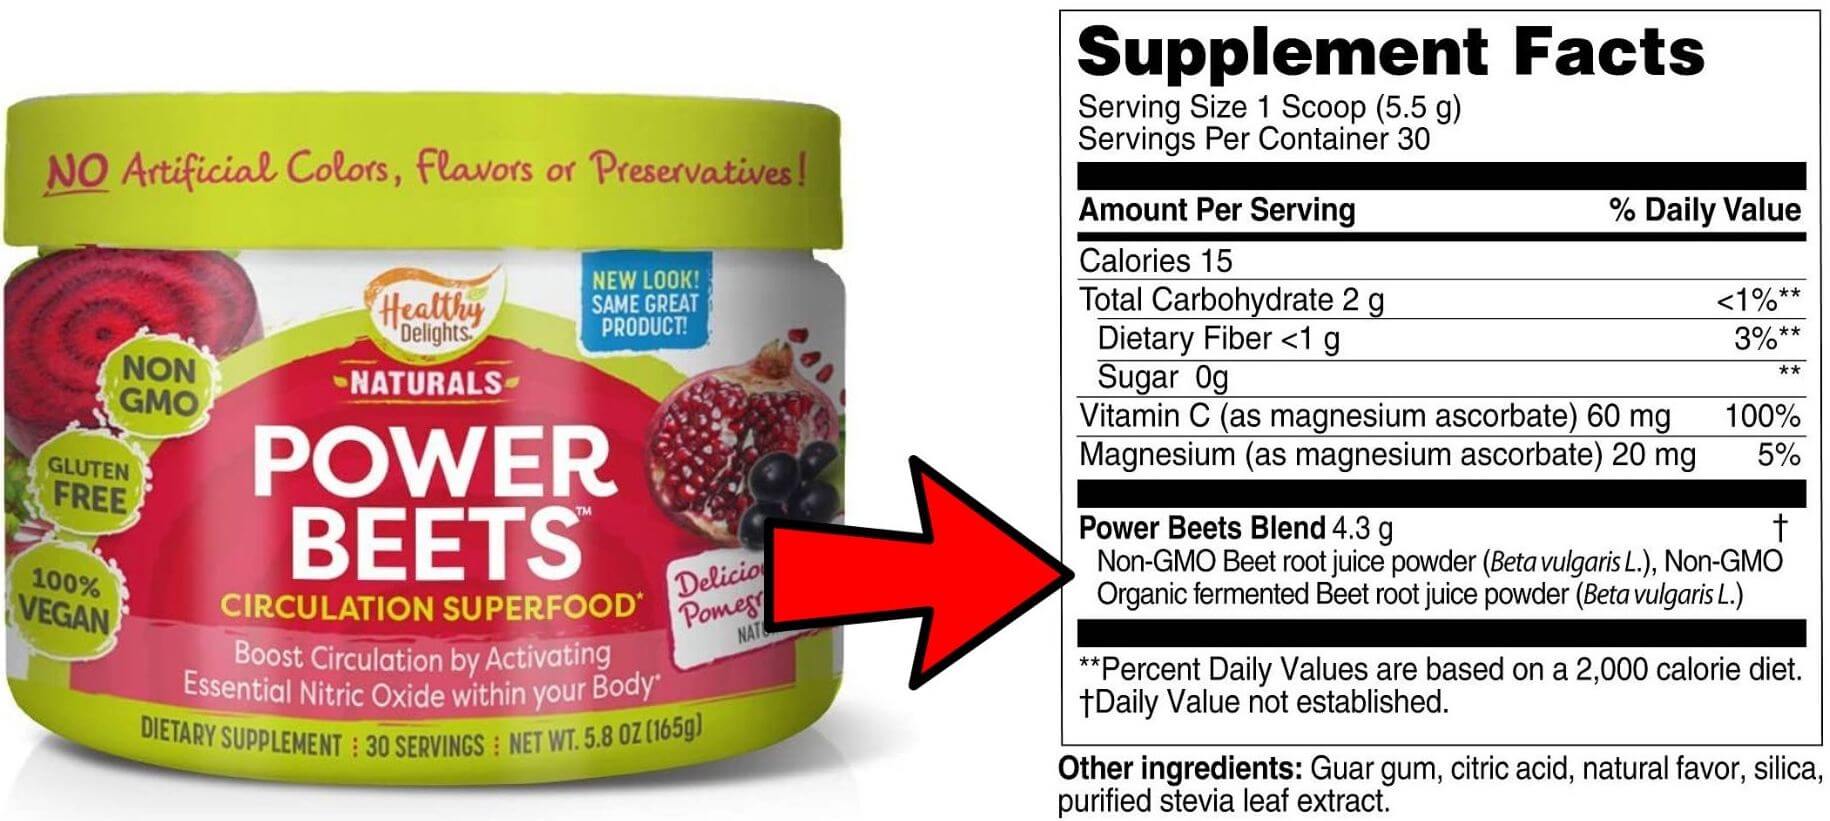 Healthy Delights Natural Power Beets Beet Root Powder Pre-Workout Supplement Facts Comparison